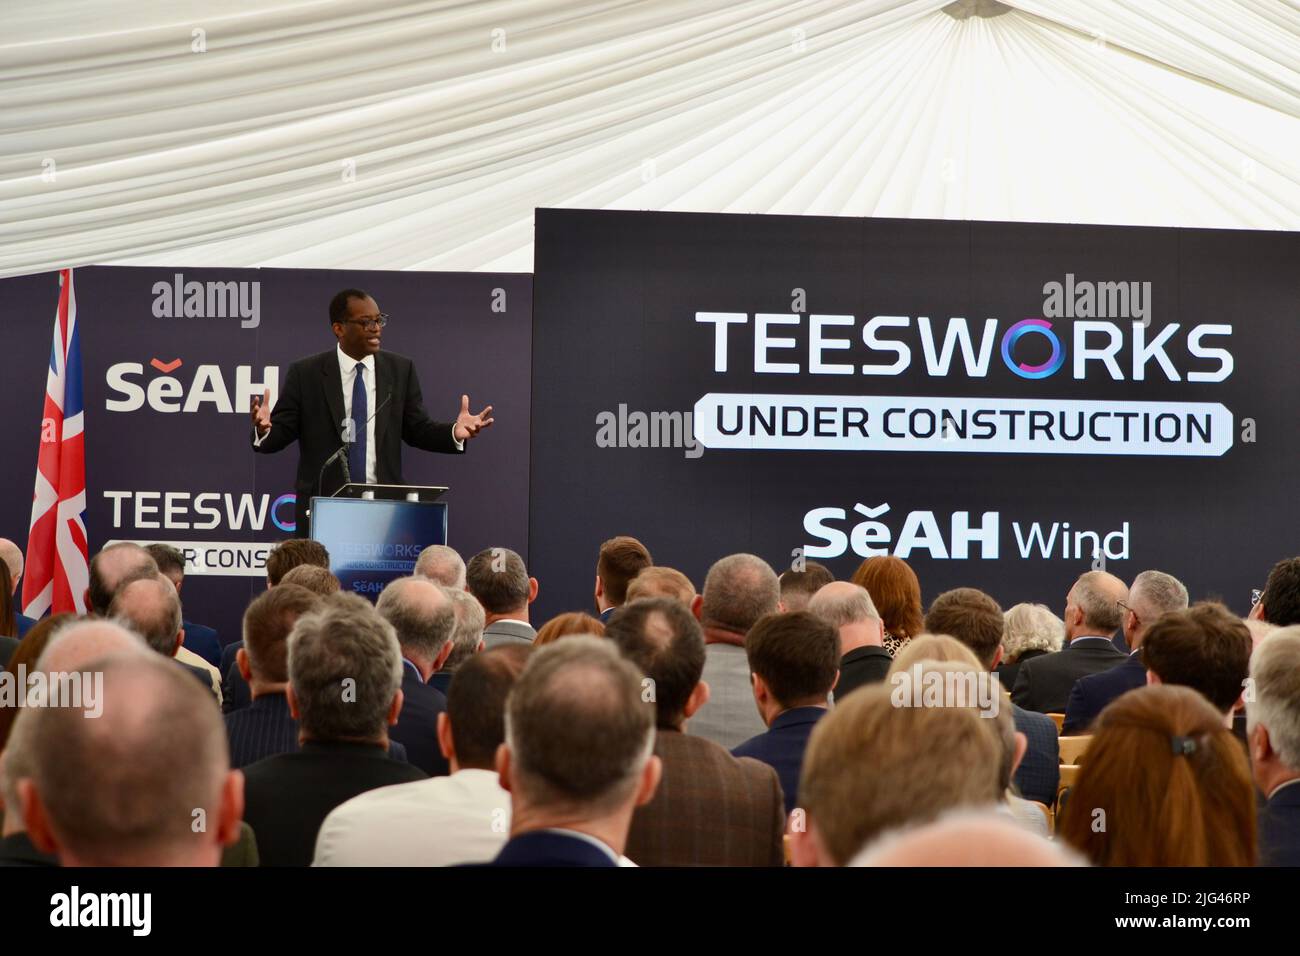 Redcar, UK. 07 Jul 2022. Kwasi Kwarteng pictured as construction started on SeAH Wind Ltd’s offshore wind facility marking the first major private sector investment beginning construction at a UK Freeport. UK Government Business Secretary, Kwarteng took part in an official Signing Ceremony, presentation and the ground breaking for the £400million facility, with more than 200 local business leaders and local politicians also attended. Credit: Teesside Snapper/Alamy Live News Stock Photo